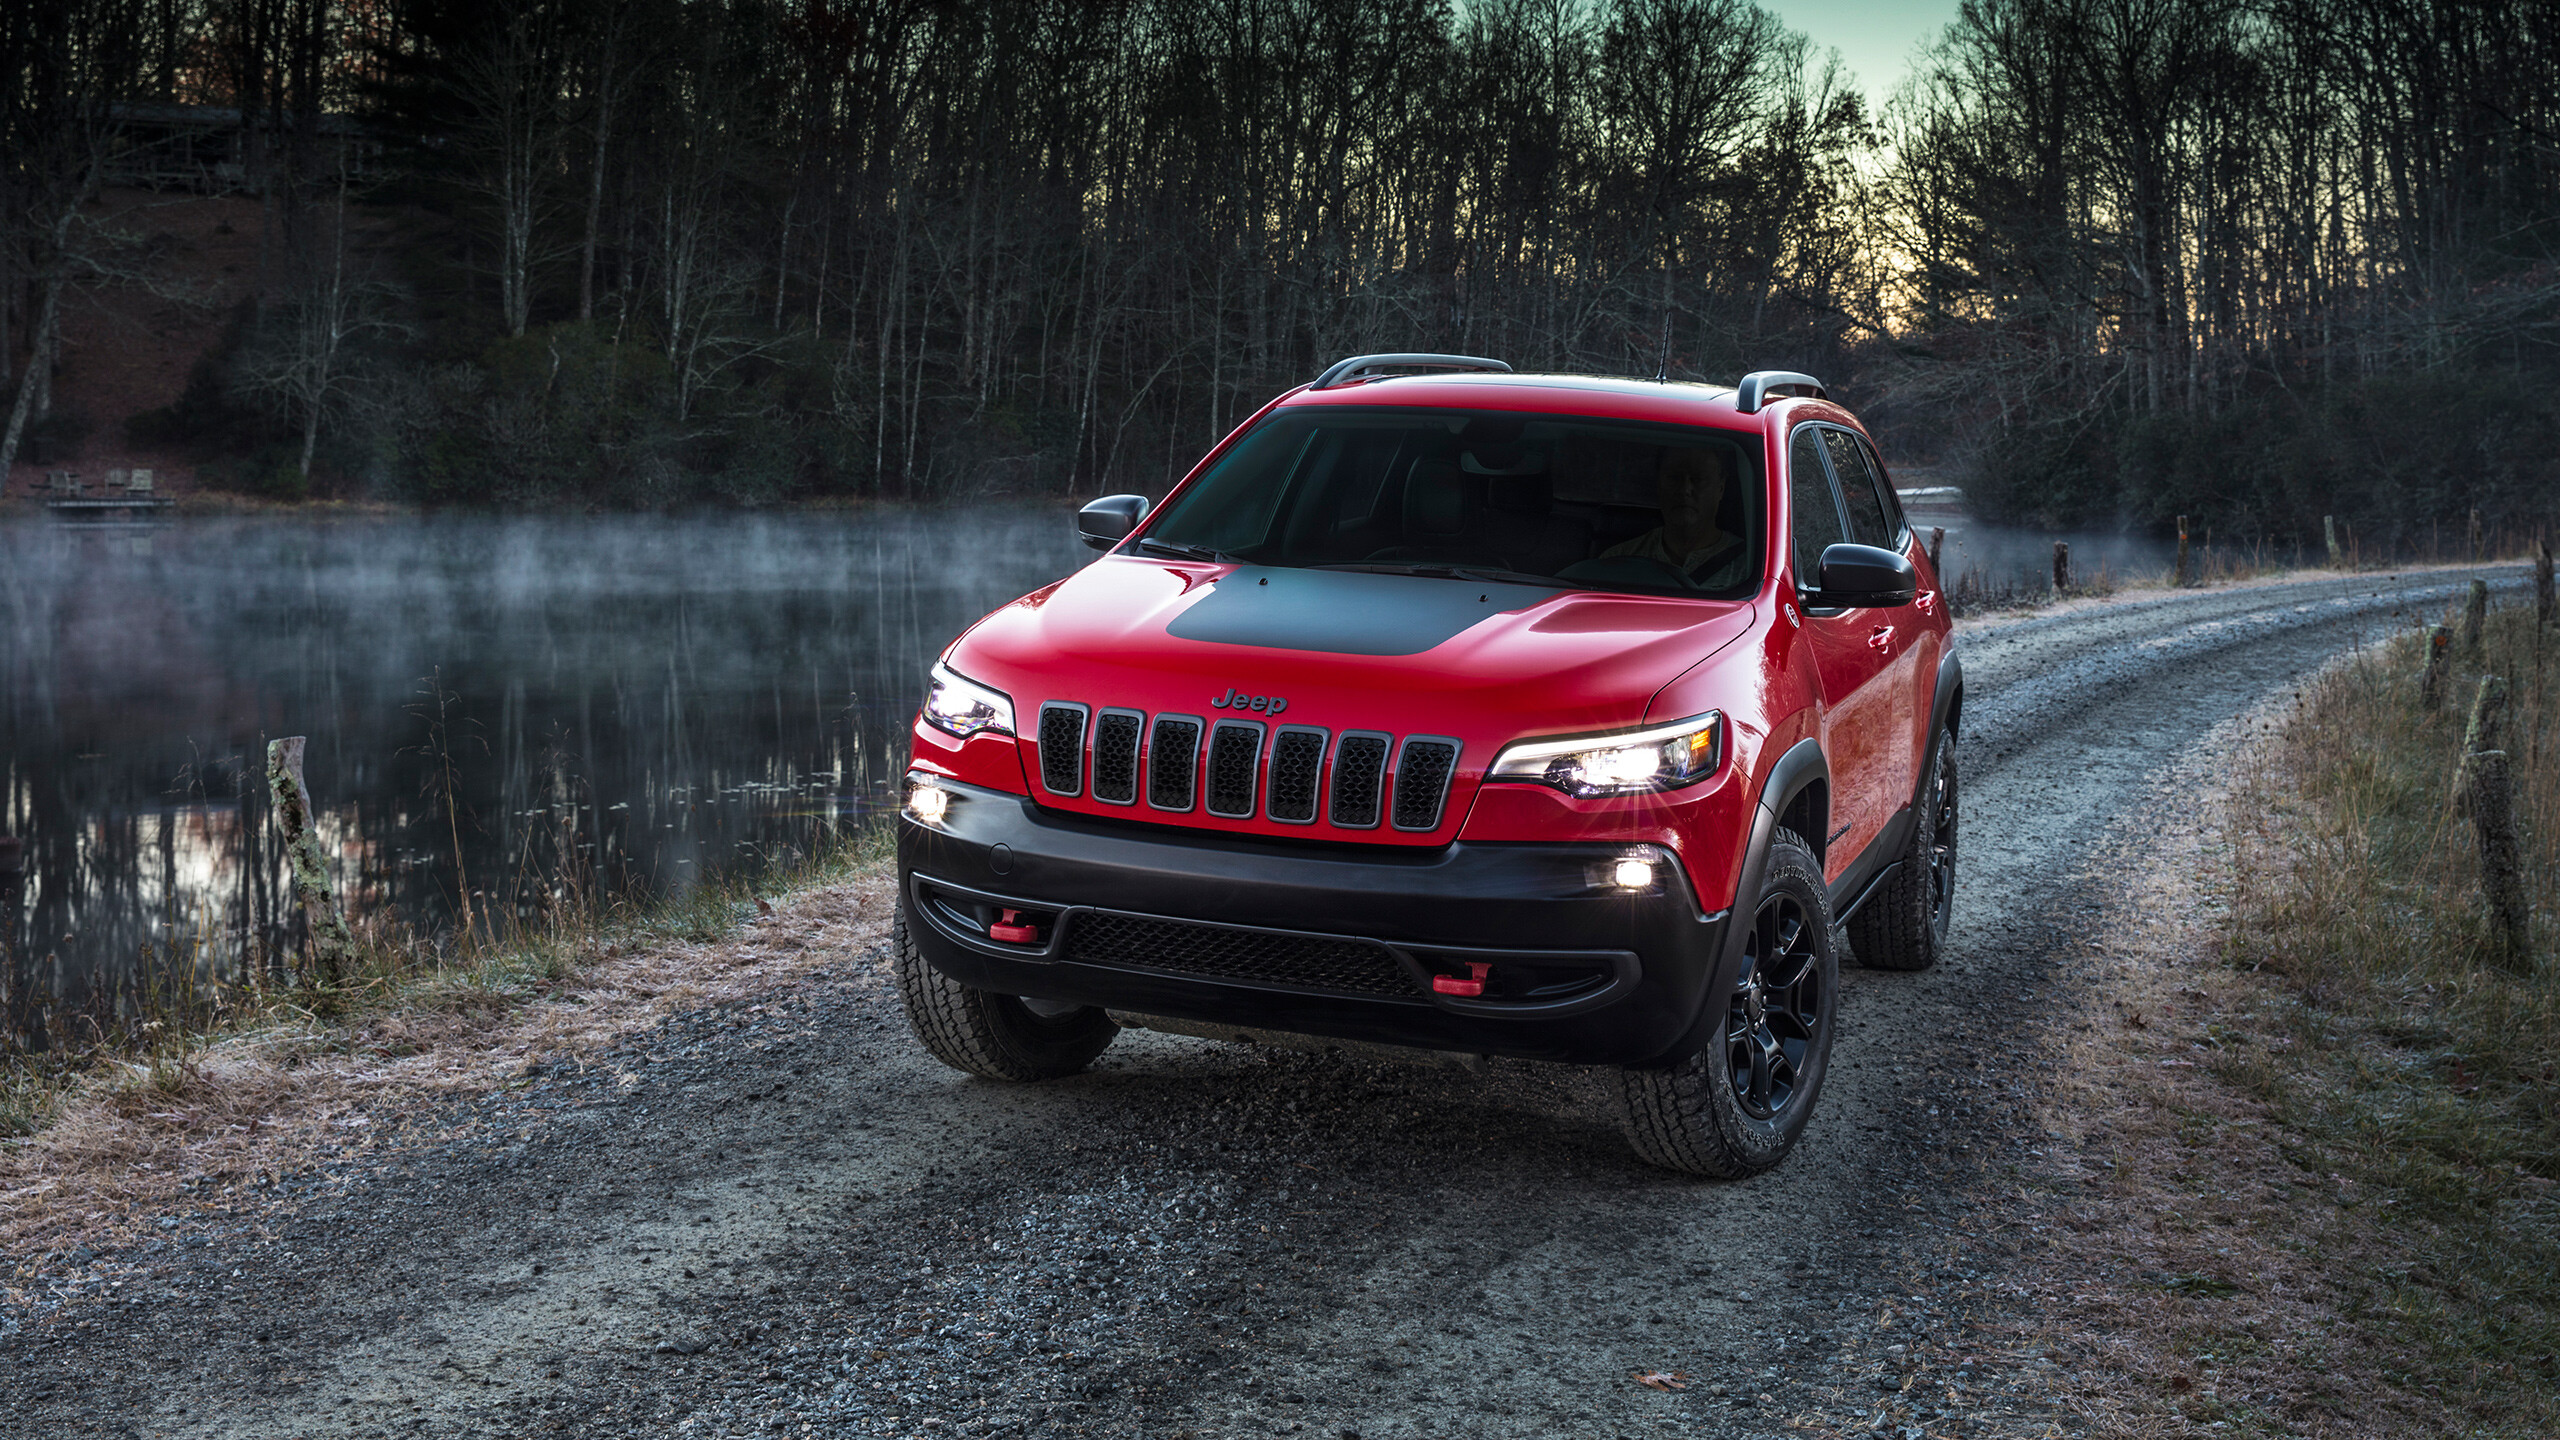 Jeep Grand Cherokee: American SUV, Combines off-road capability with on-road comfort. 2560x1440 HD Background.